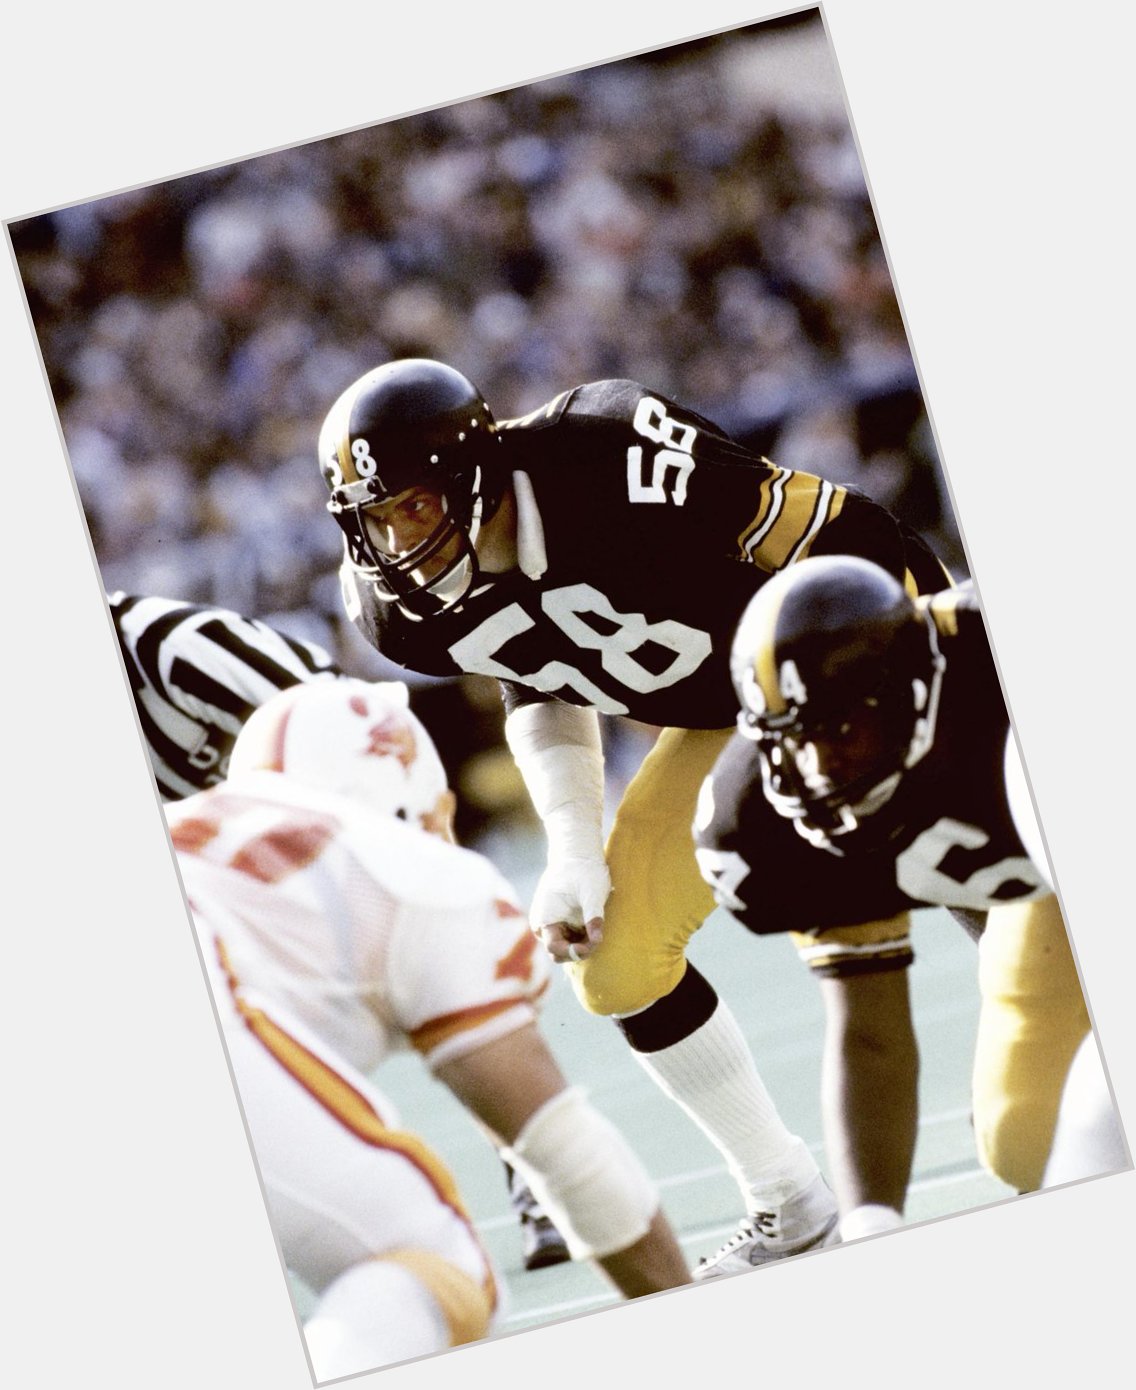 The most feared linebacker in Happy birthday to former LB Jack Lambert. 